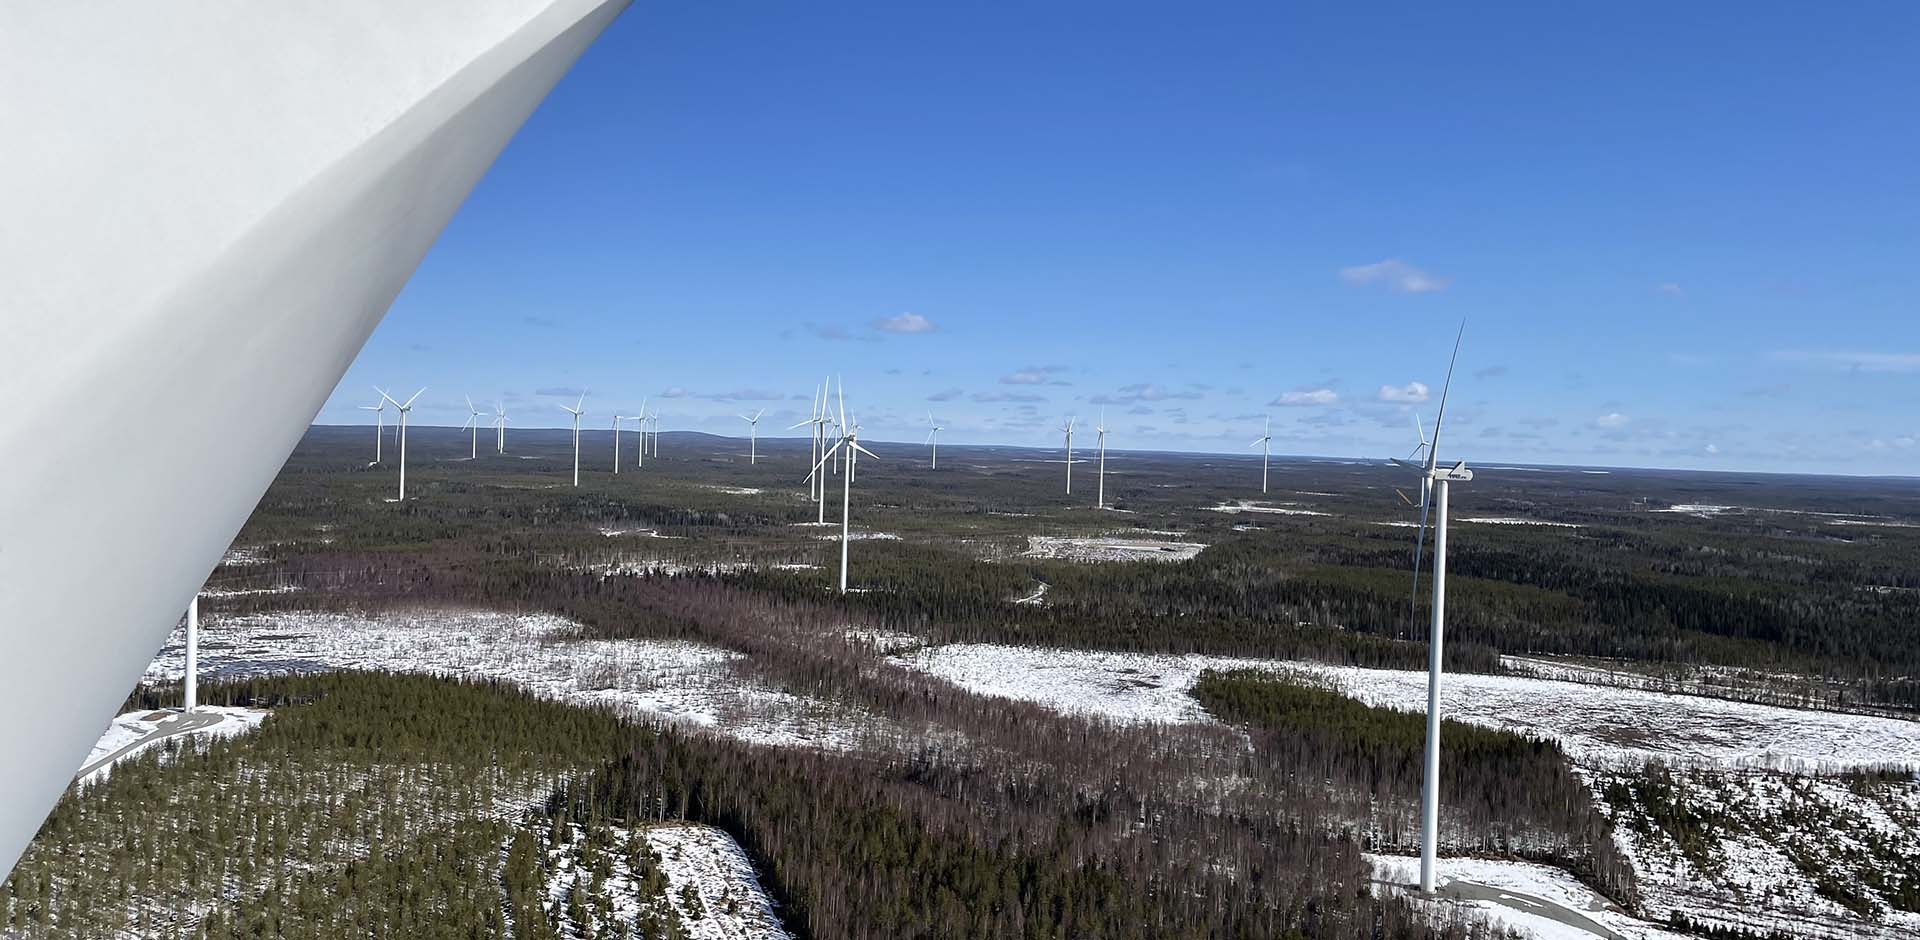  A view from the top of the wind turbine to a winter forest (a photo by Antti Polet)